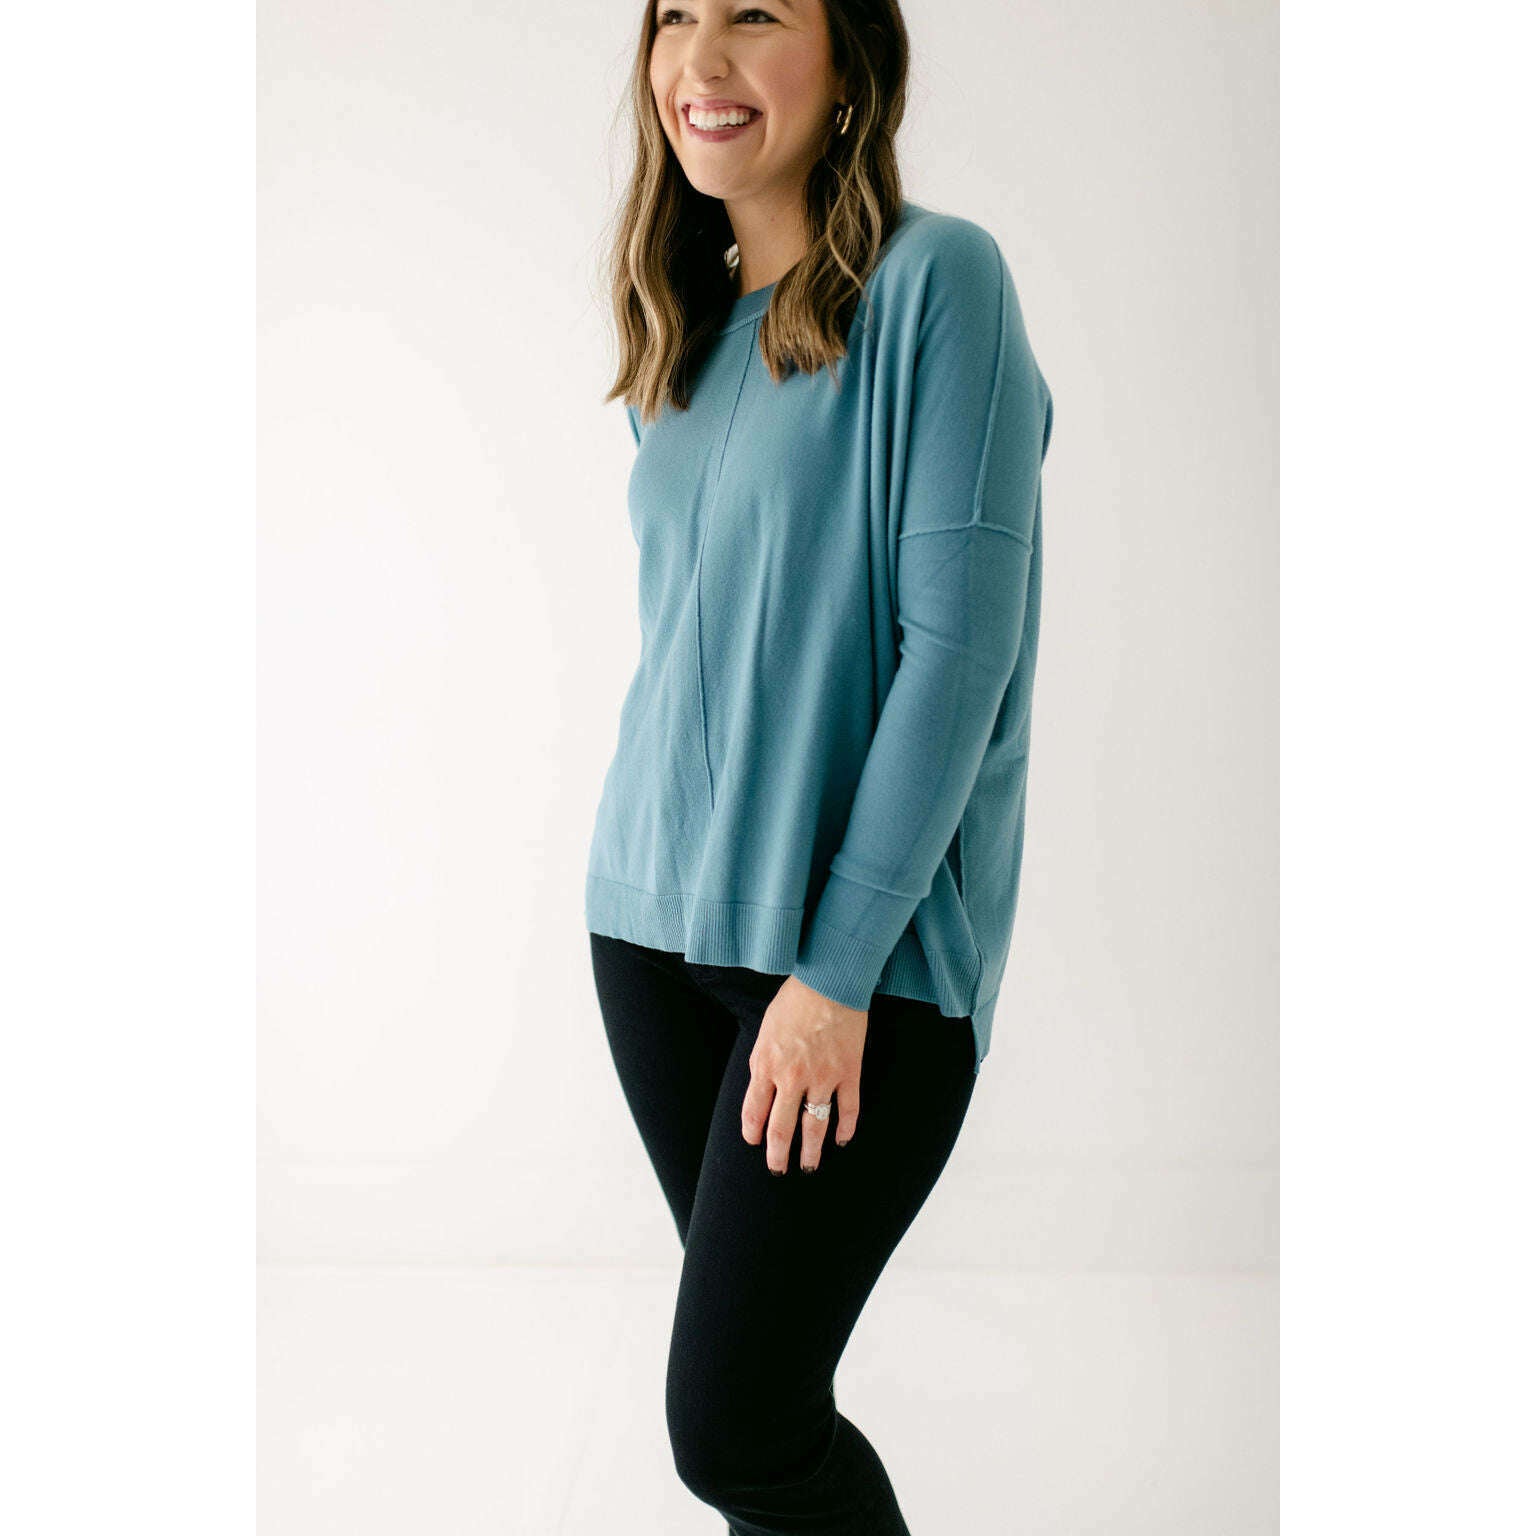 8.28 Boutique:Karlie Clothes,Karlie Solid Novelty Crew Sweater in Dusty Blue,Sweaters